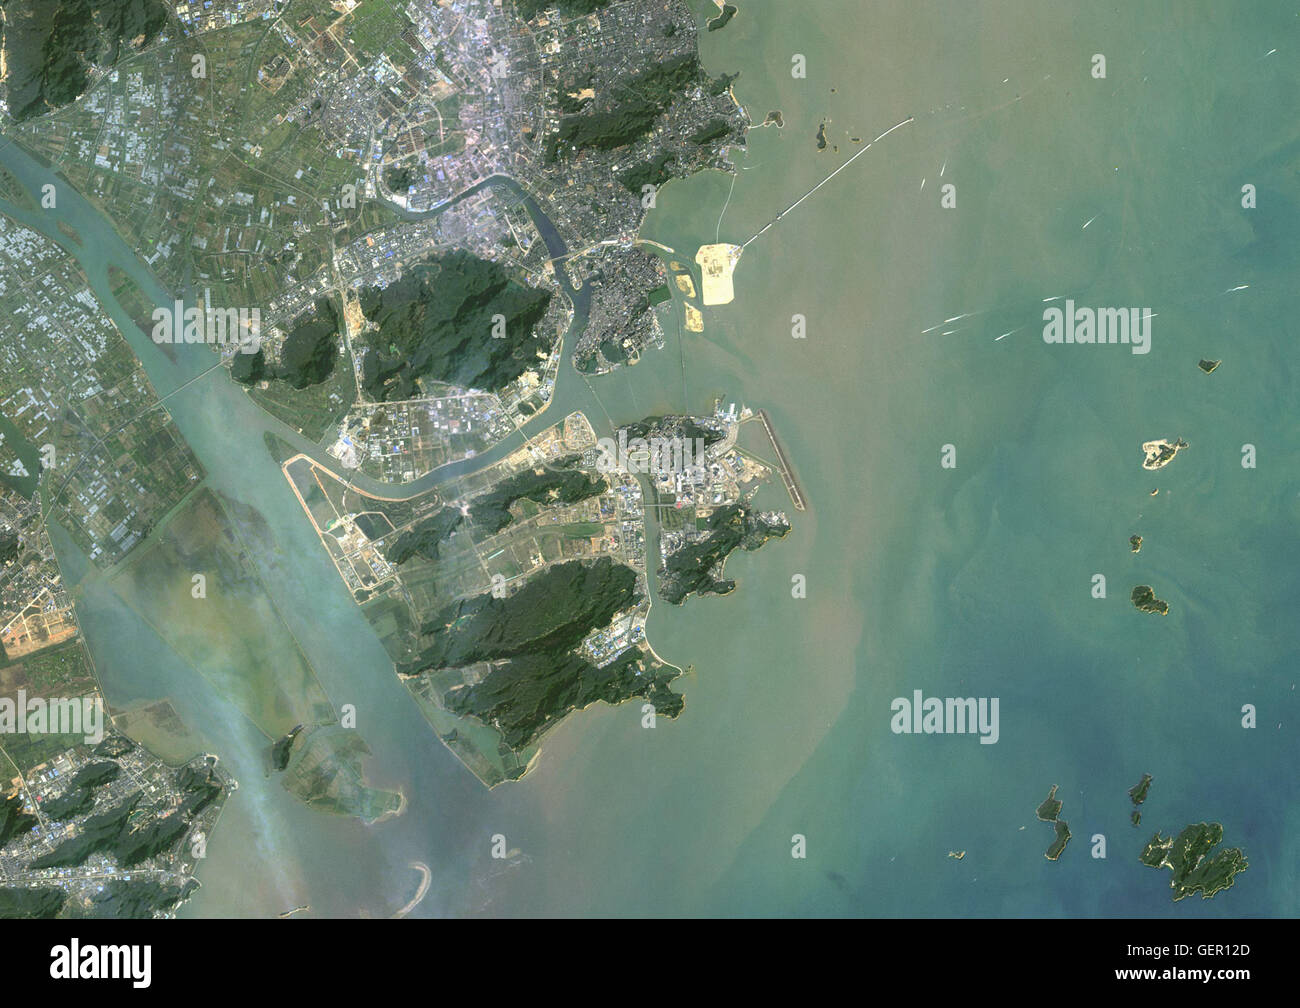 Satellite view of Macau. This image was compiled from data acquired by Landsat 8 satellite in 2015. Stock Photo